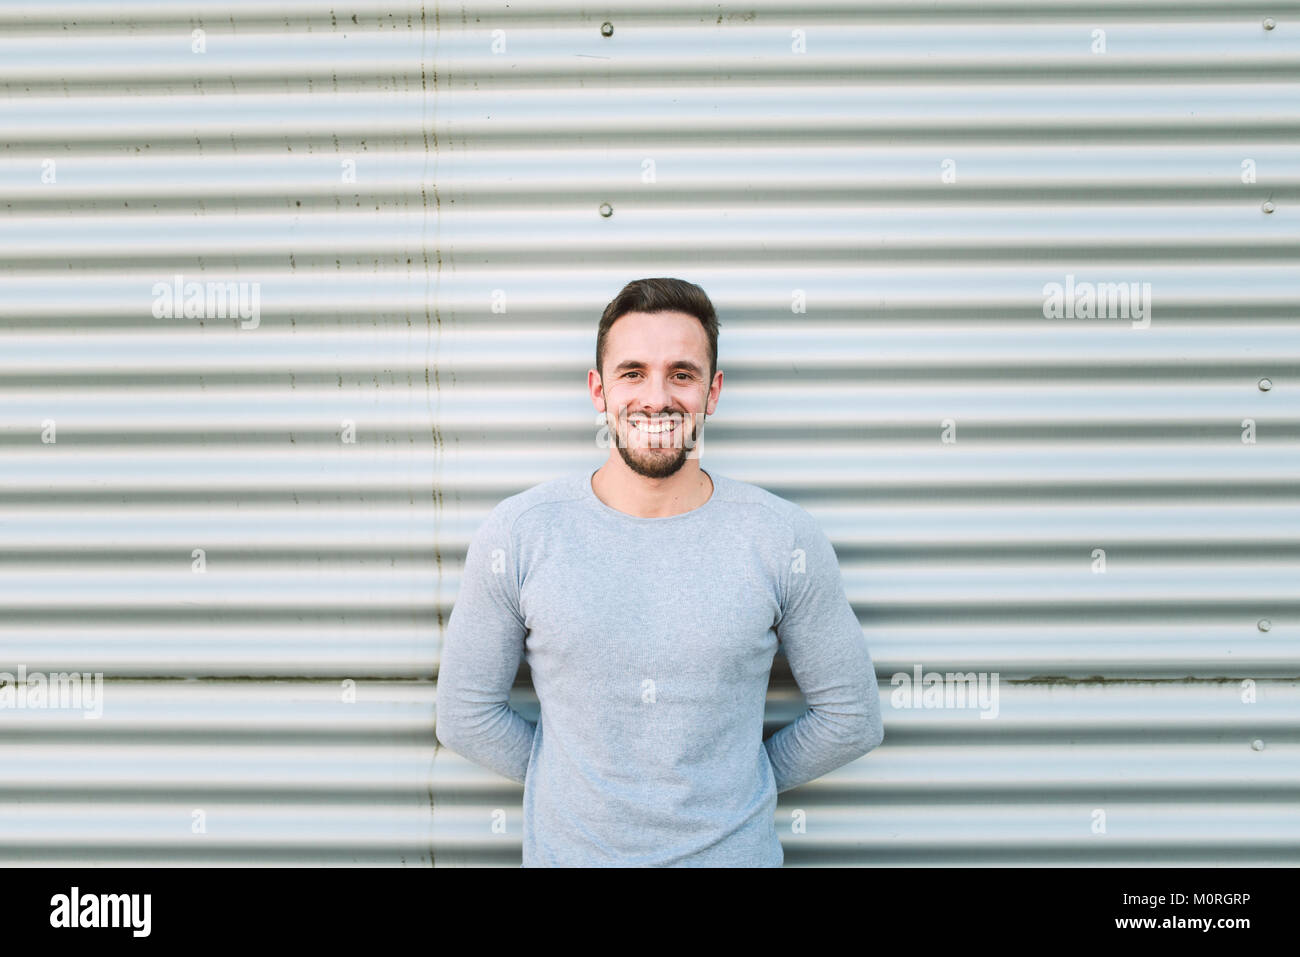 Portrait of laughing man with hands behind his back Stock Photo